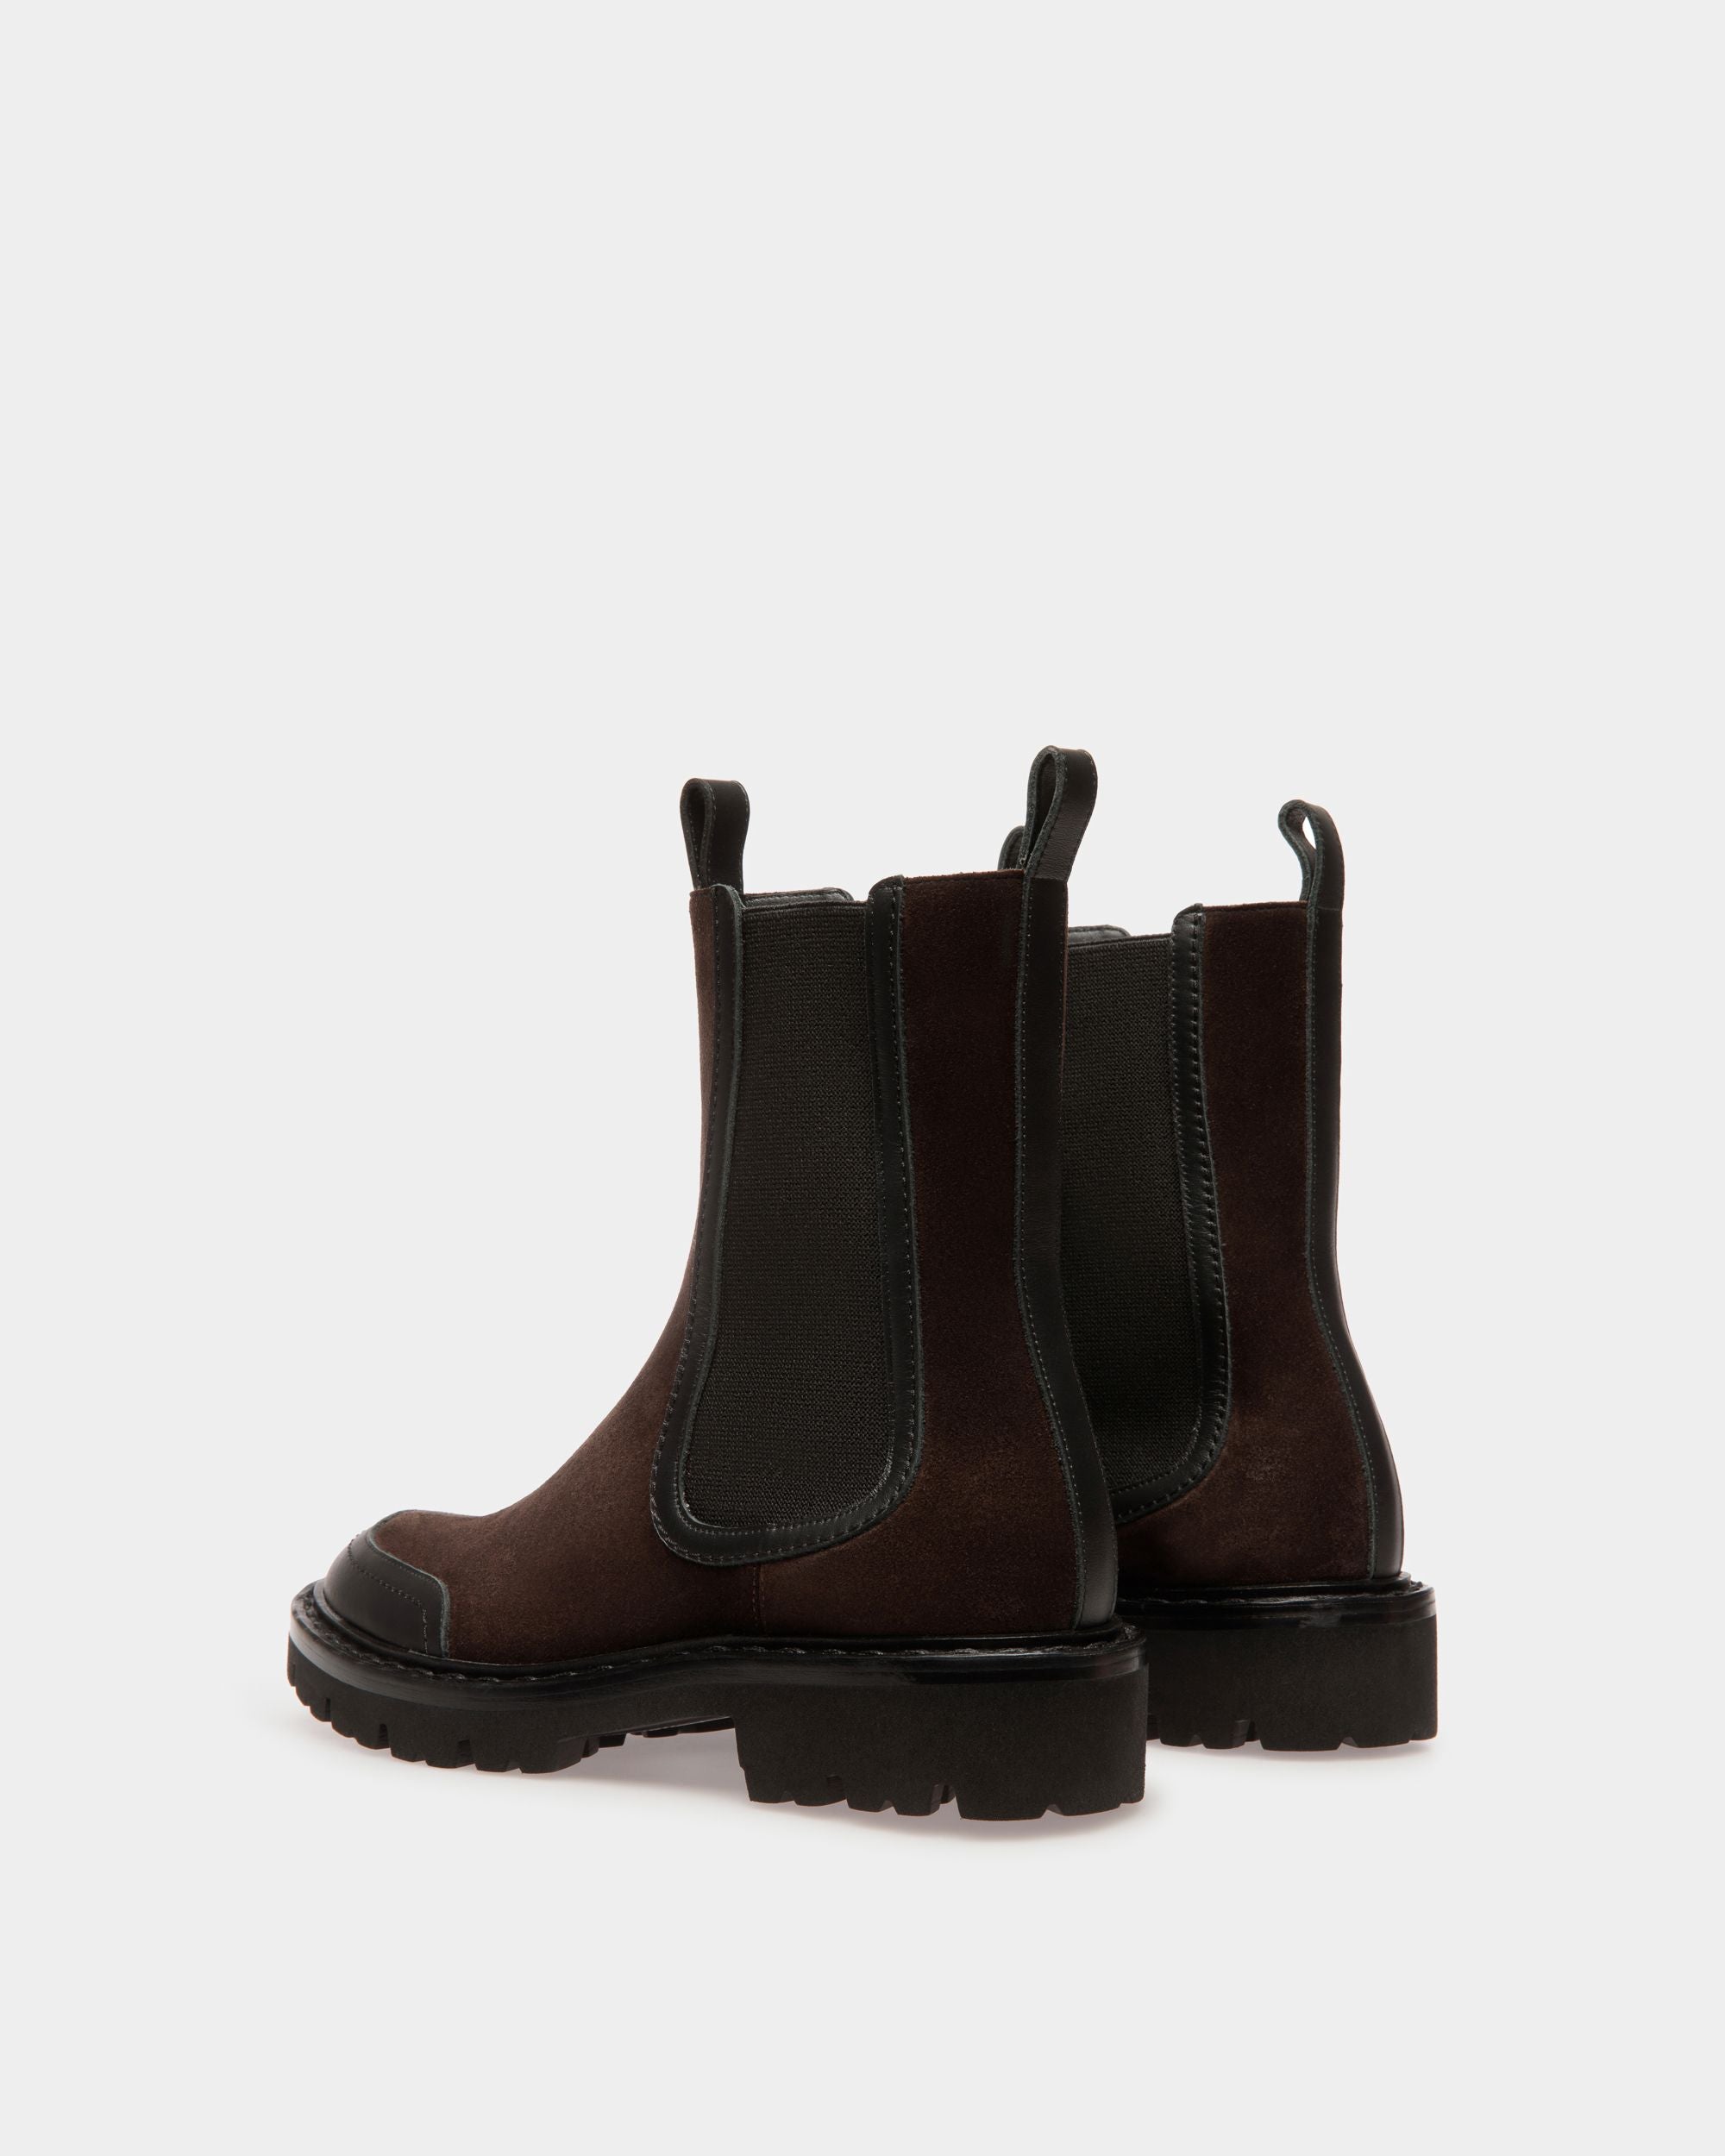 Nalyna | Women's Boots | Brown Leather | Bally | Still Life 3/4 Back